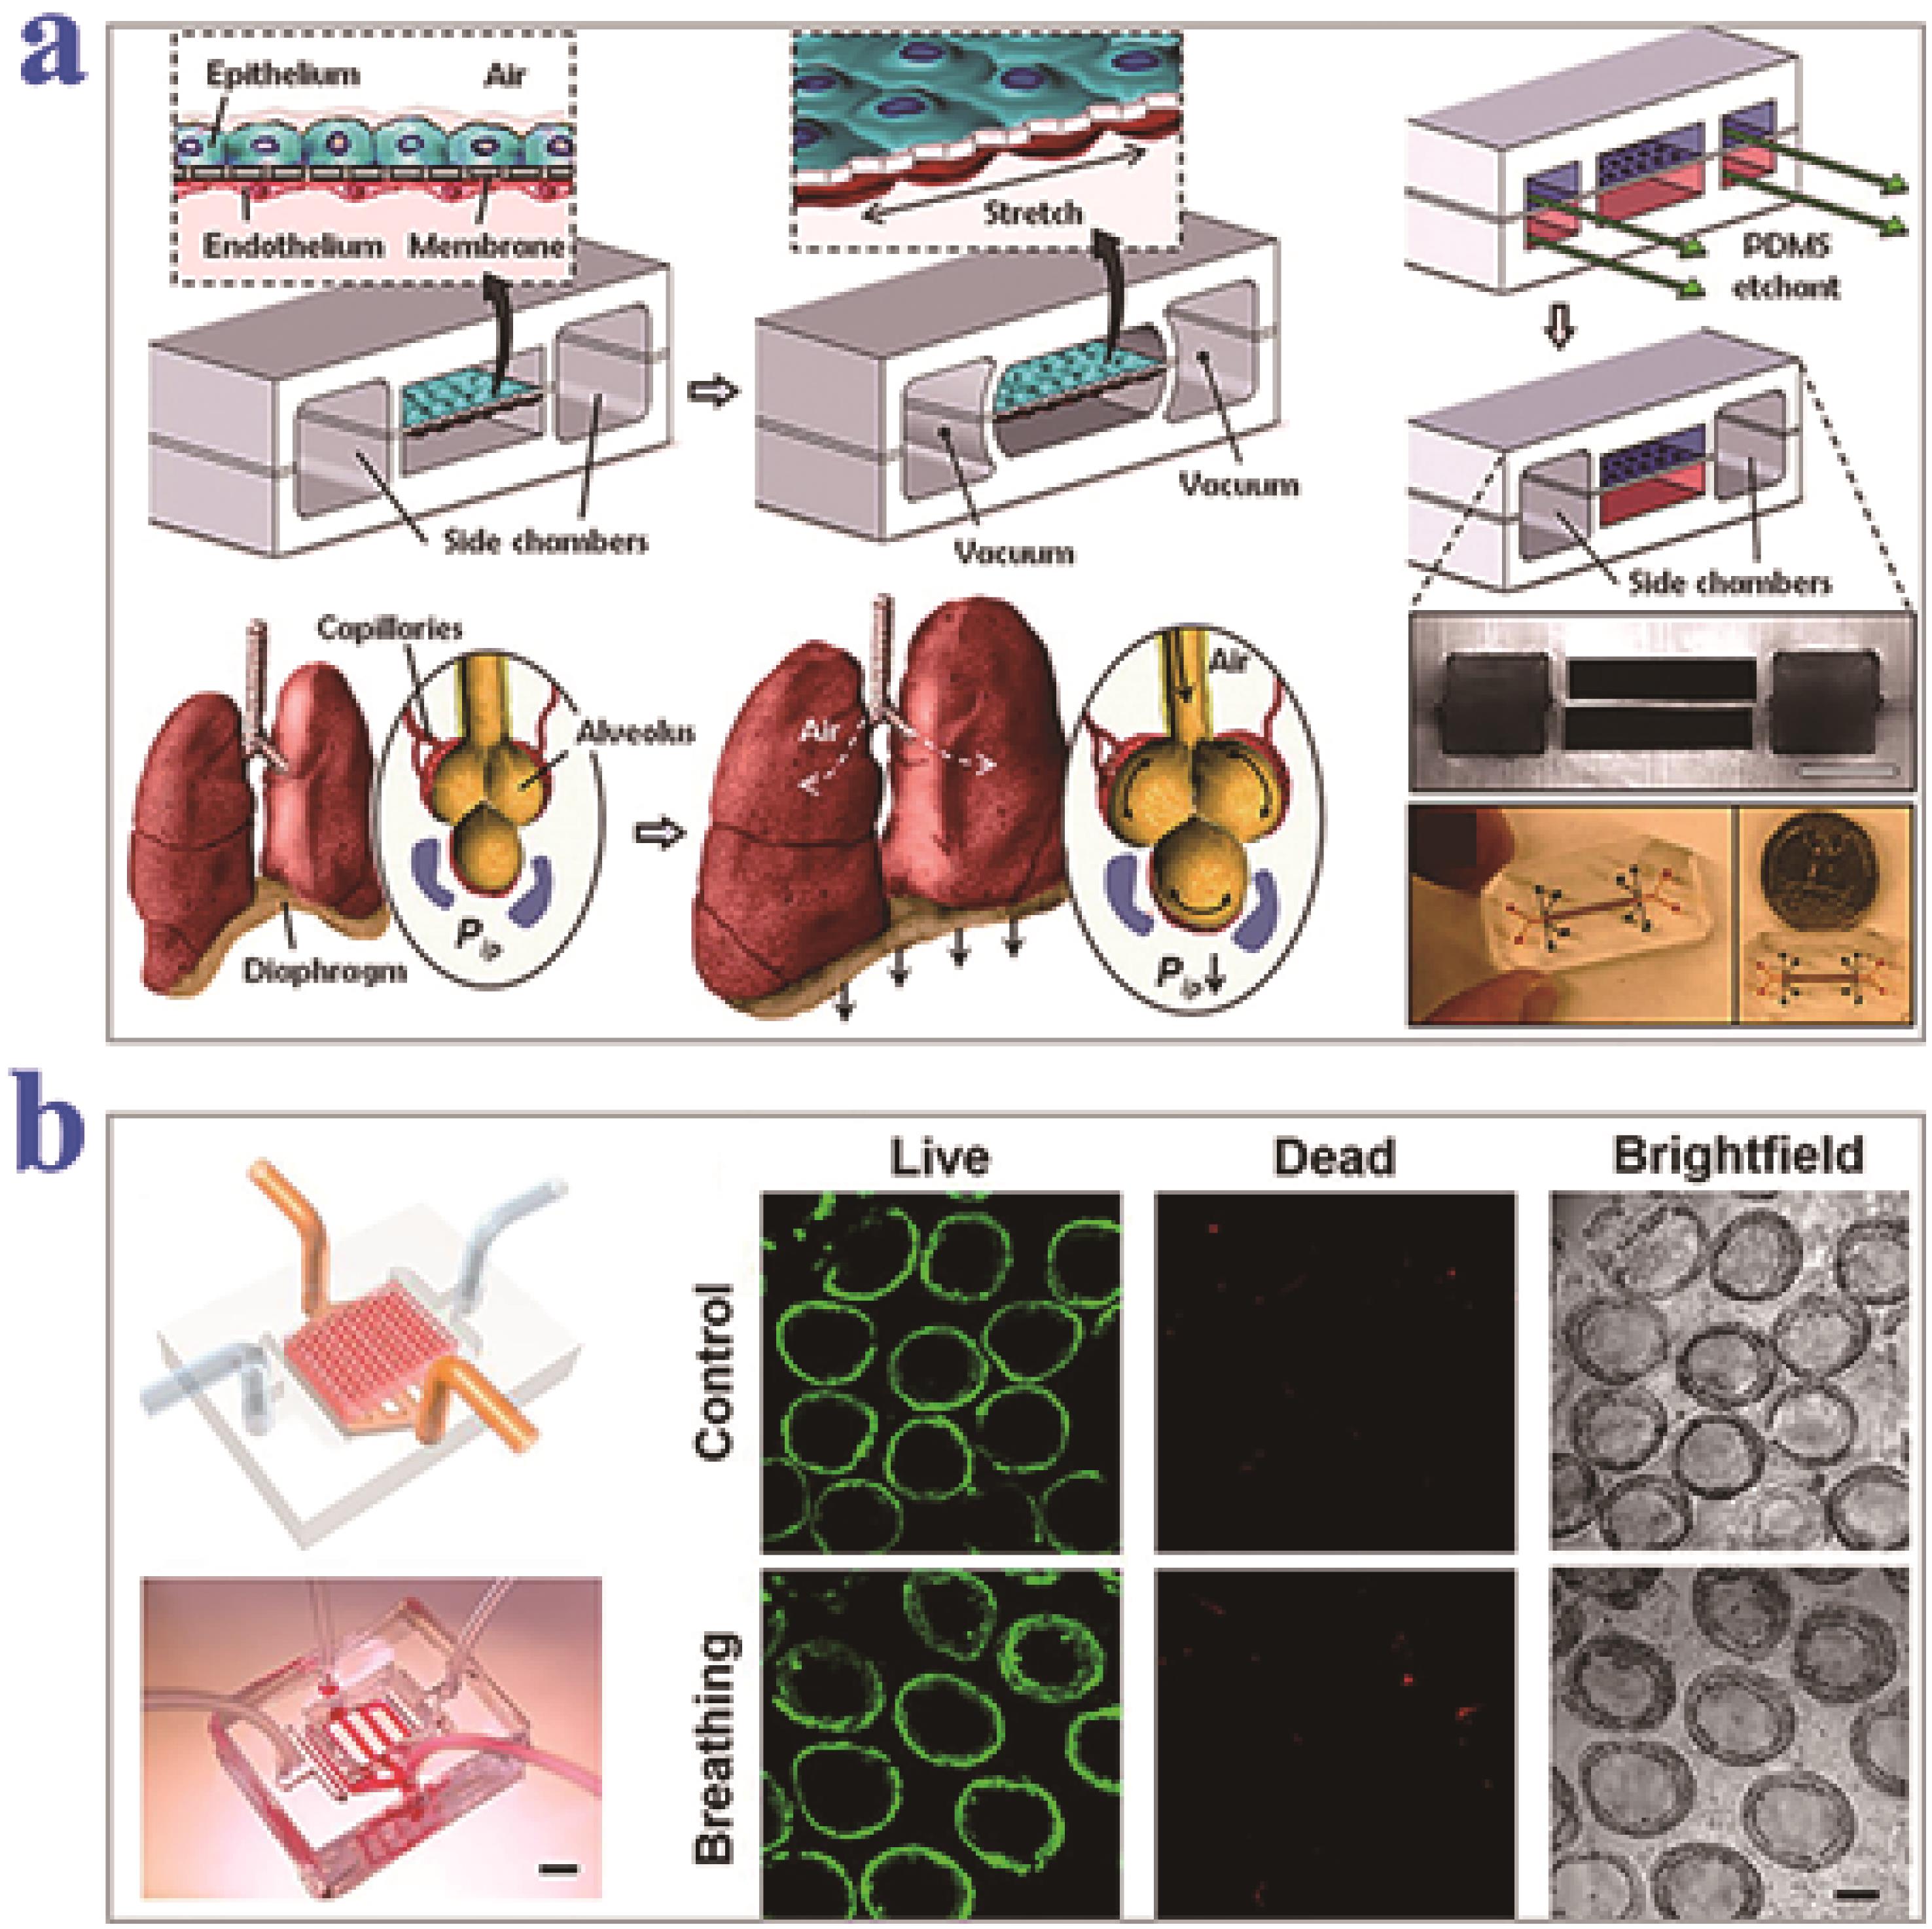 Human 'organs-on-chips' could accelerate personalized medicine ...